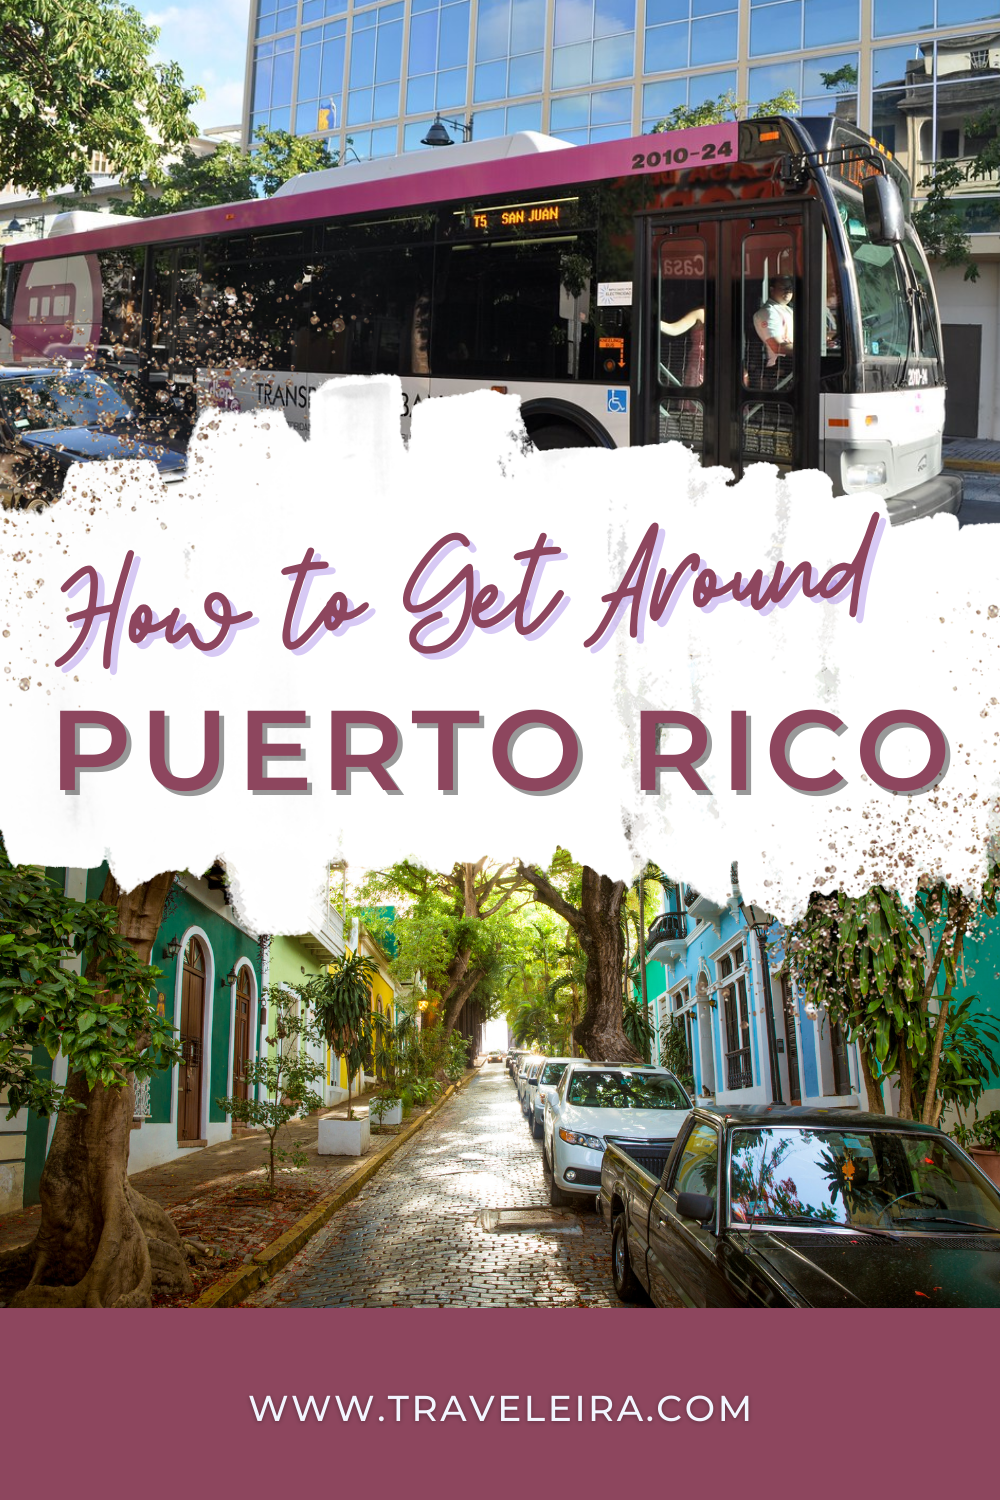 Discover the best transportation options to get around Puerto Rico. Learn how to get around Puerto Rico, get around the island exploring its beauty.